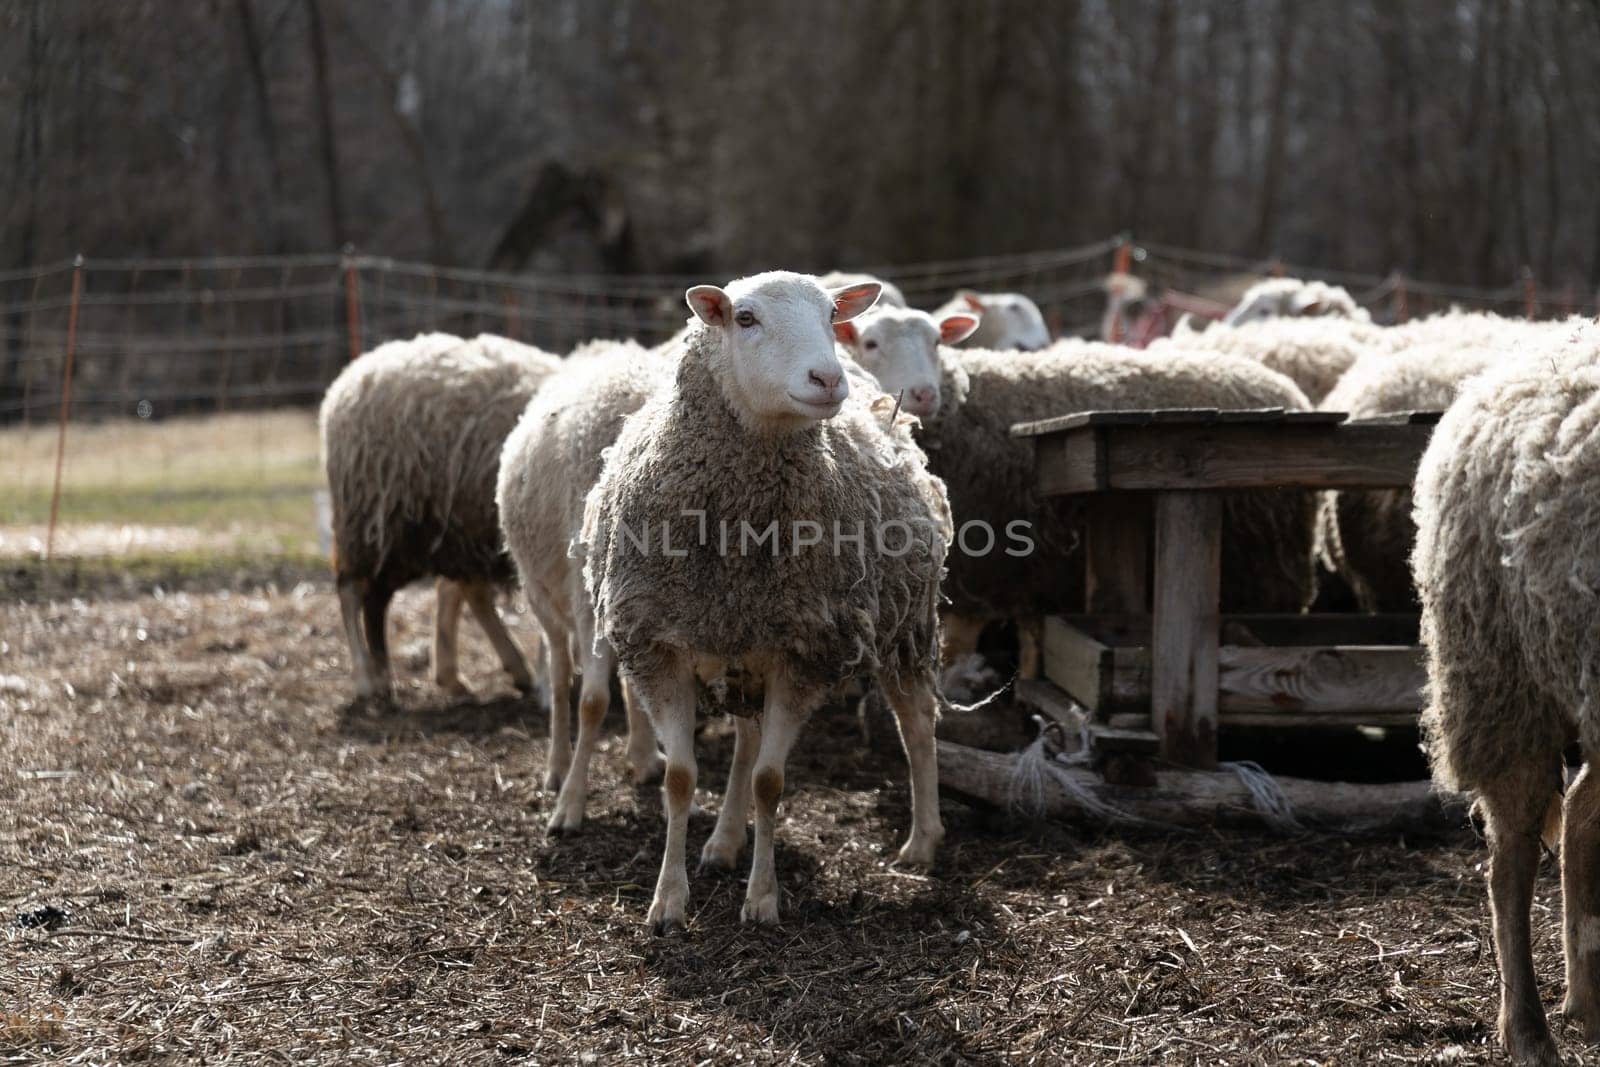 A group of sheep gathered on a barren grass field, all standing still and looking around. The dry grass under their hooves adds a rustic feel to the scene.